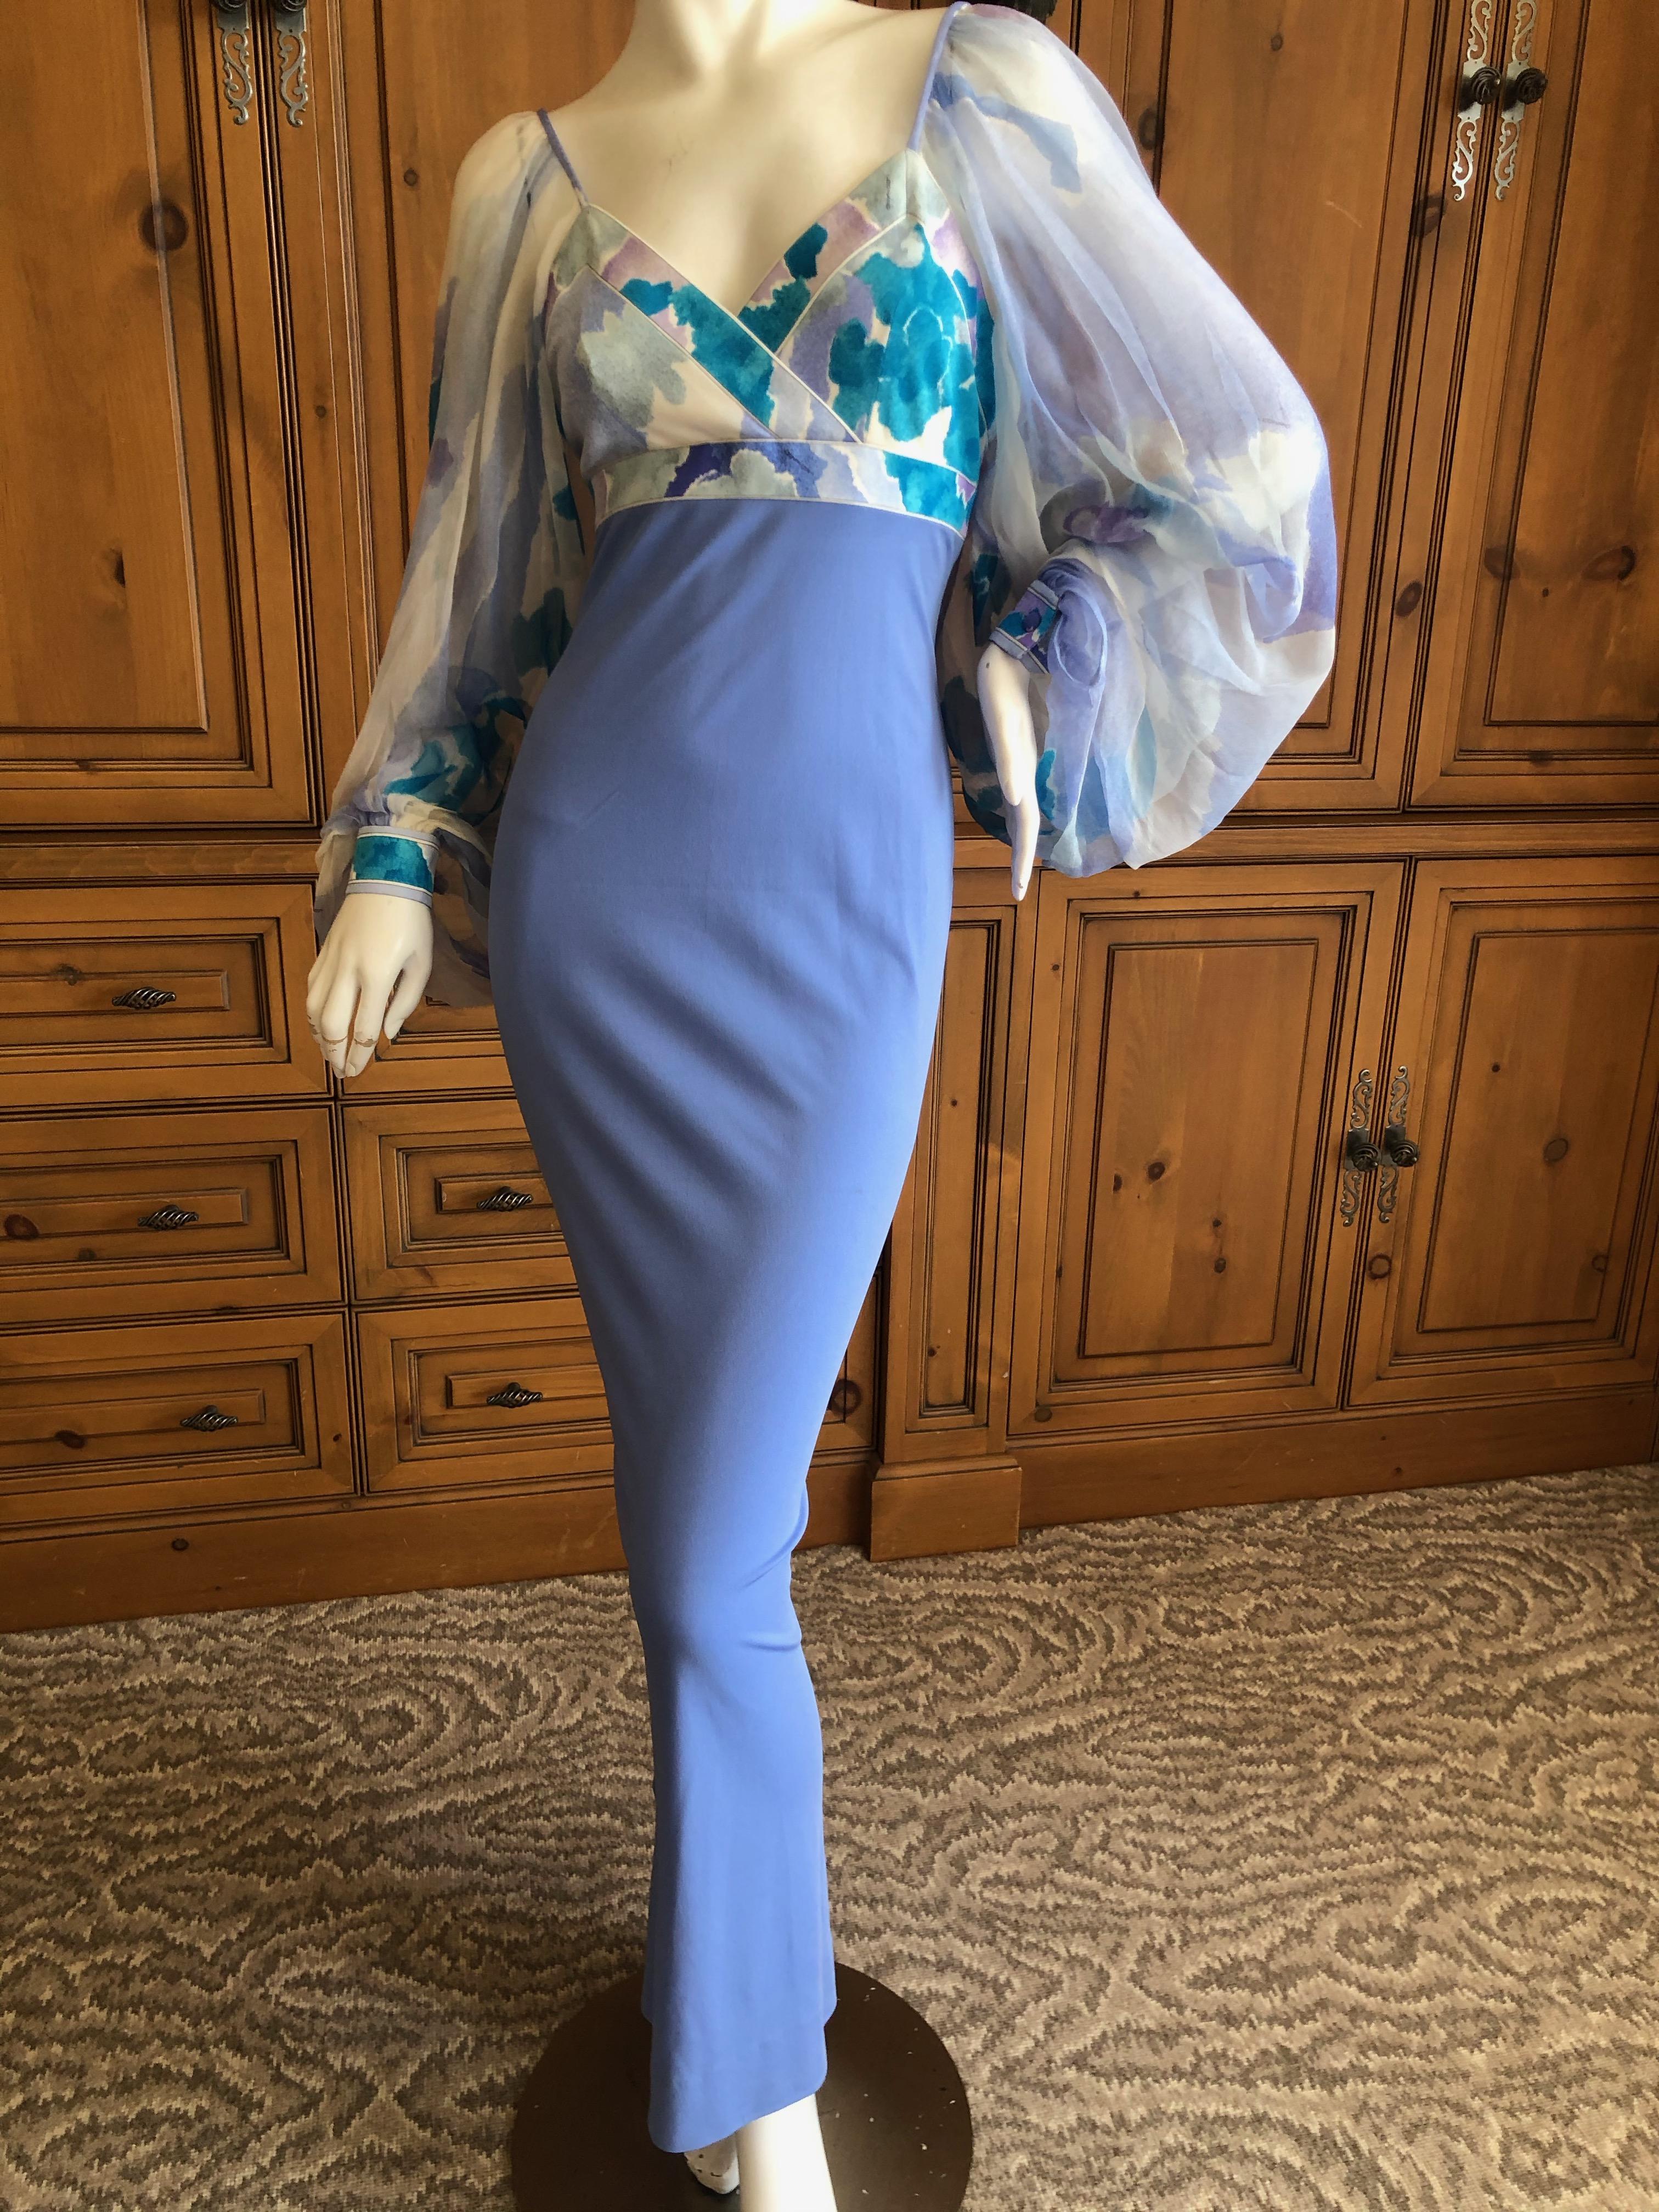 Leonard Paris Silk Jersey Vintage Long Evening Dress with Sheer Poet Sleeve .
So pretty, please use the zoom lens to see details.
Leonard Paris was a contemporary of Pucci, both houses creating brilliant 60's patterns on silk jersey.
 Both were very